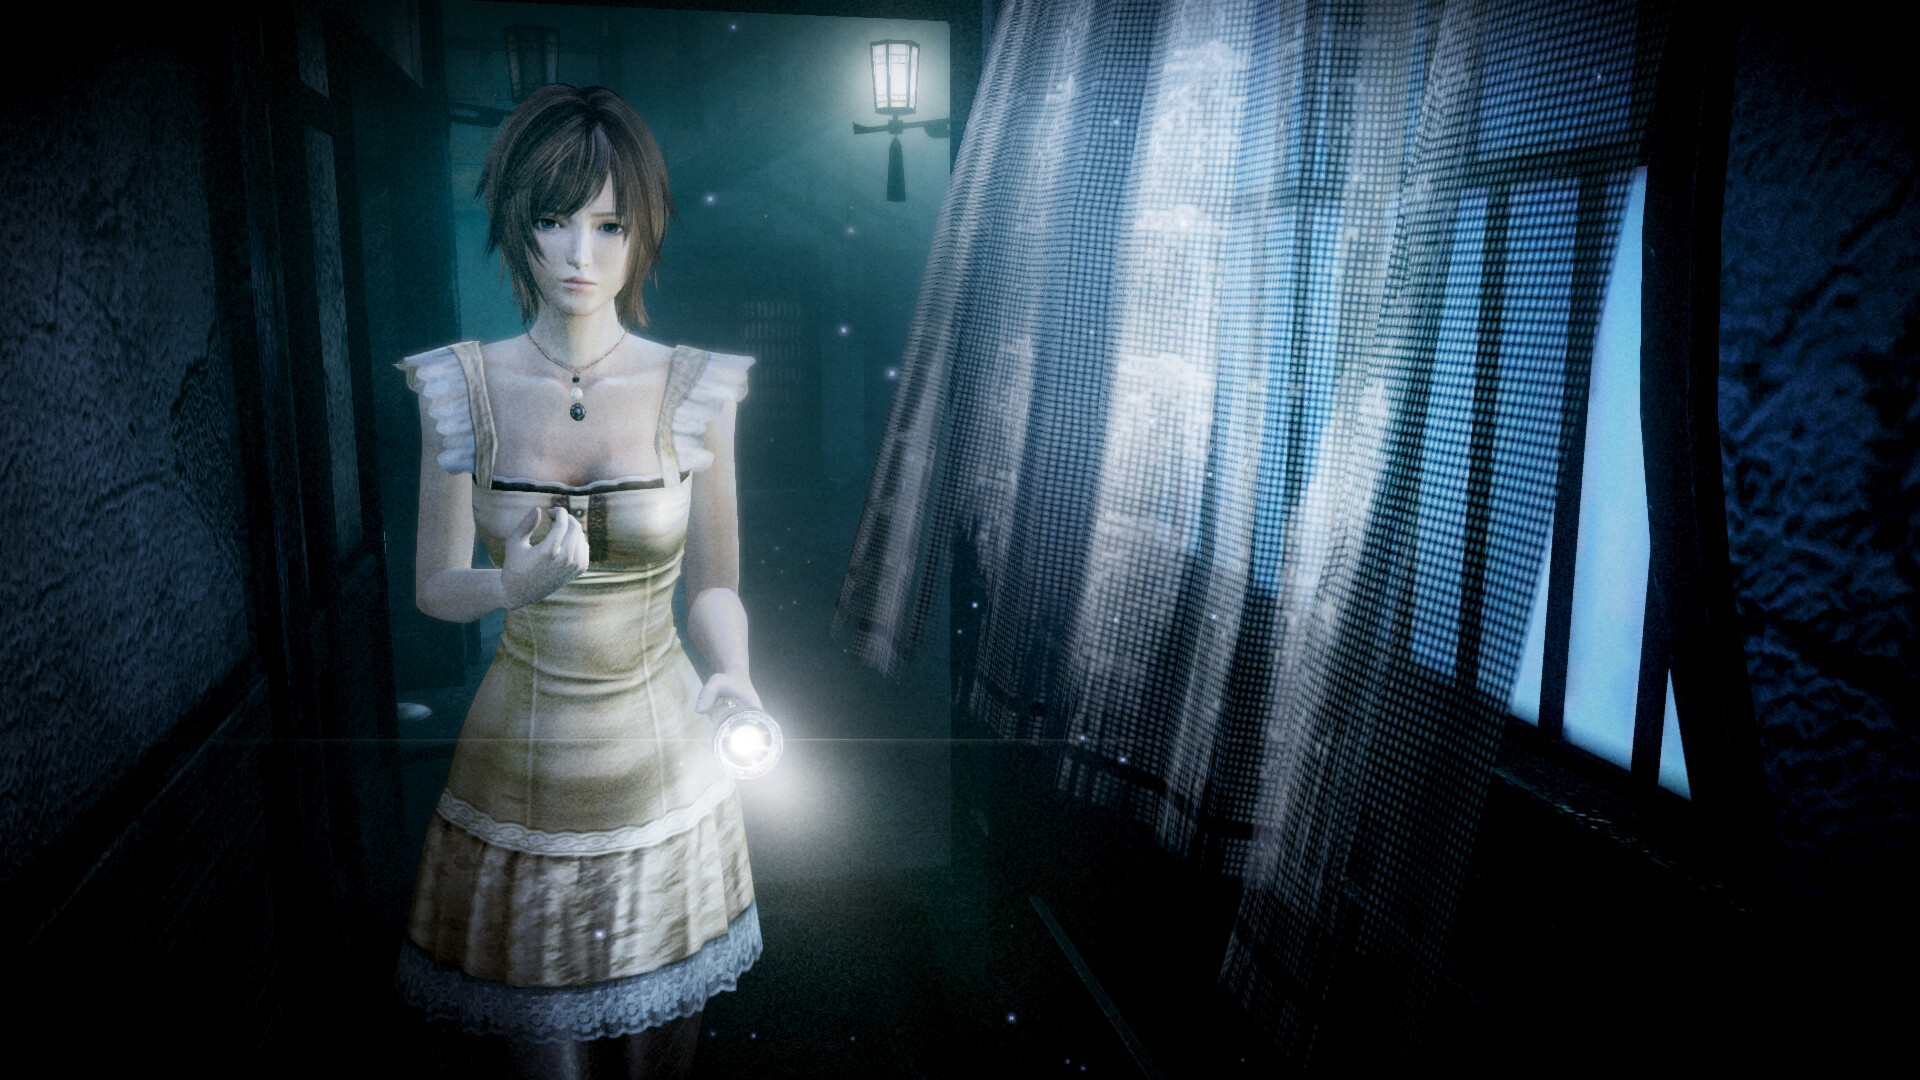 A young woman with short dark hair, wearing a white and yellow dress, holds a flashlight in one hand as she proceeds down a dark hallway in Fatal Frame: Mask of the Lunar Eclipse.